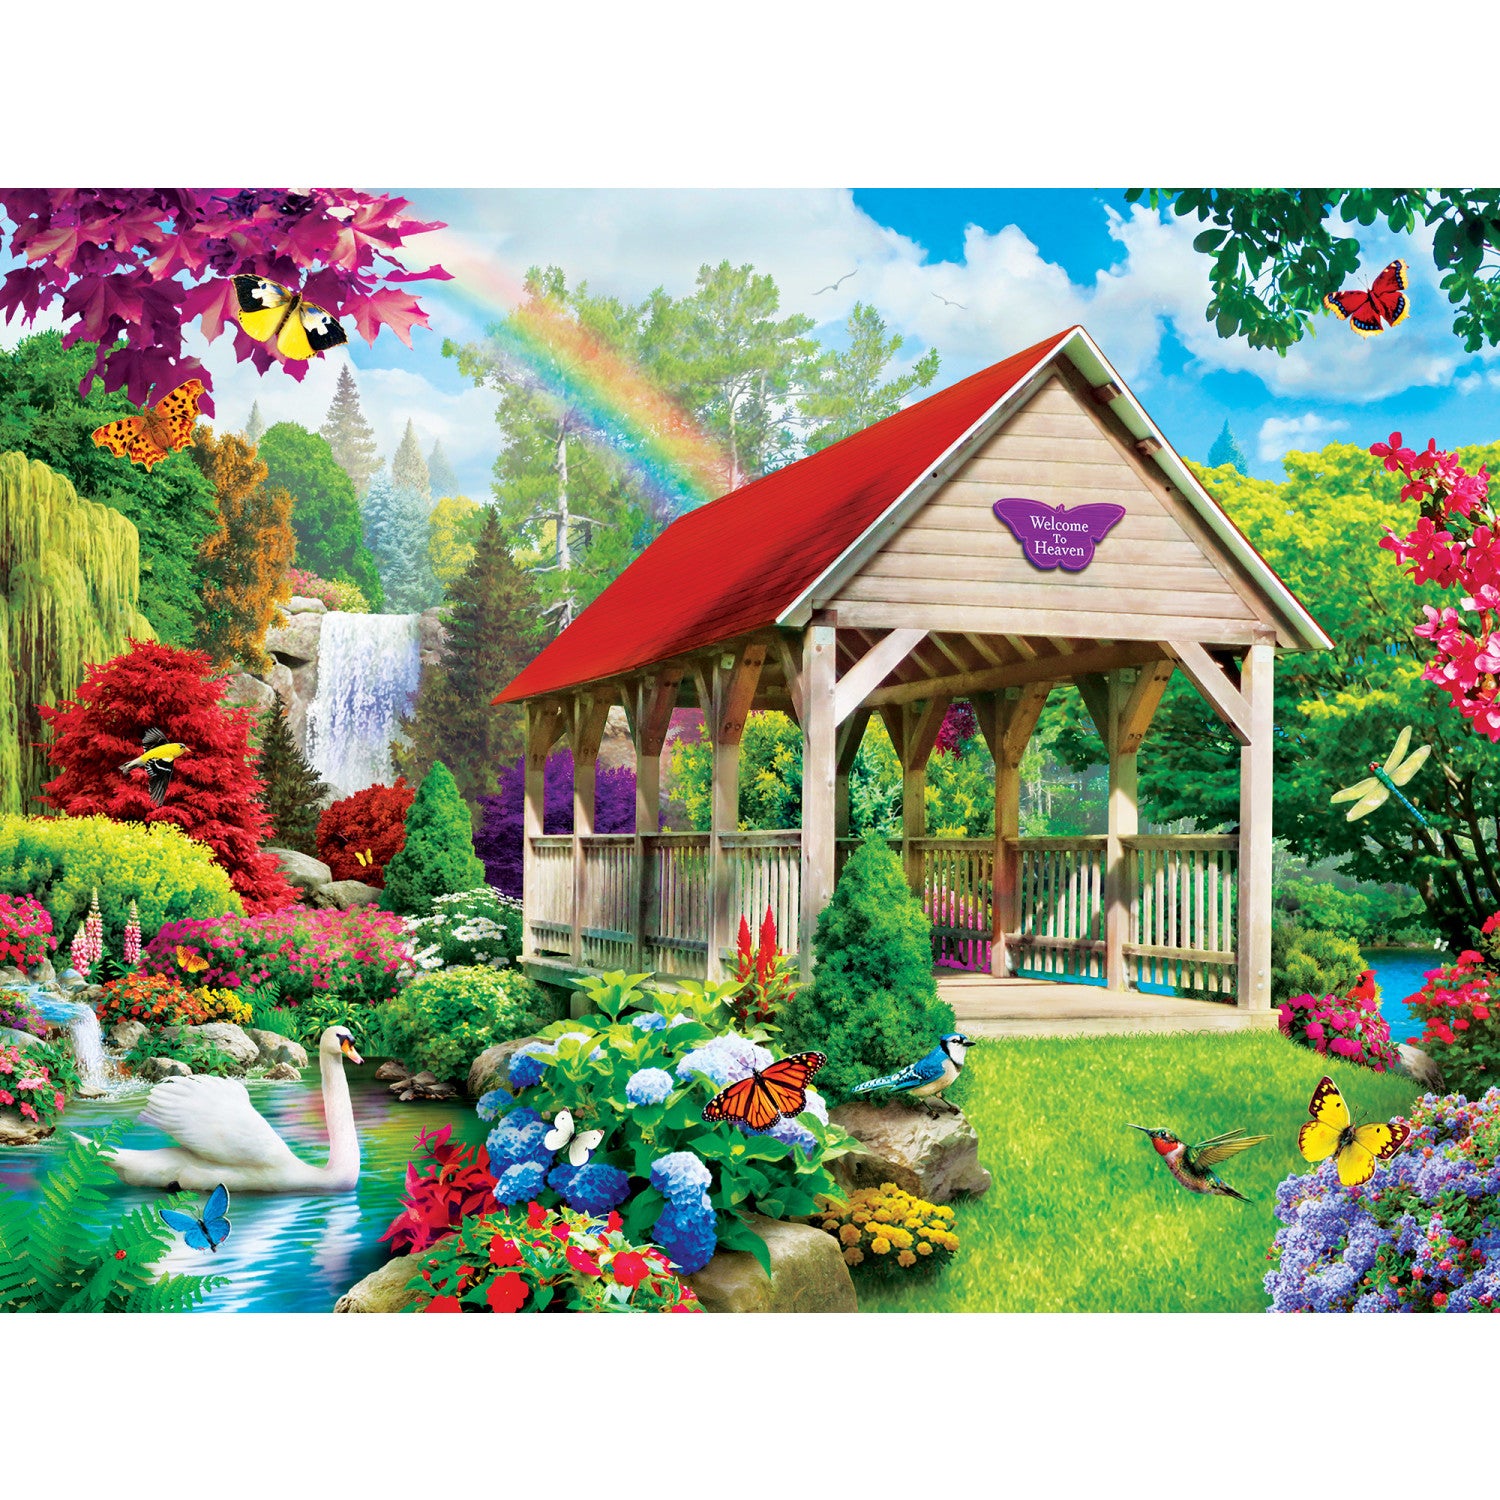 Memory Lane - Welcome to Heaven 300 Piece Puzzle By Alan Giana